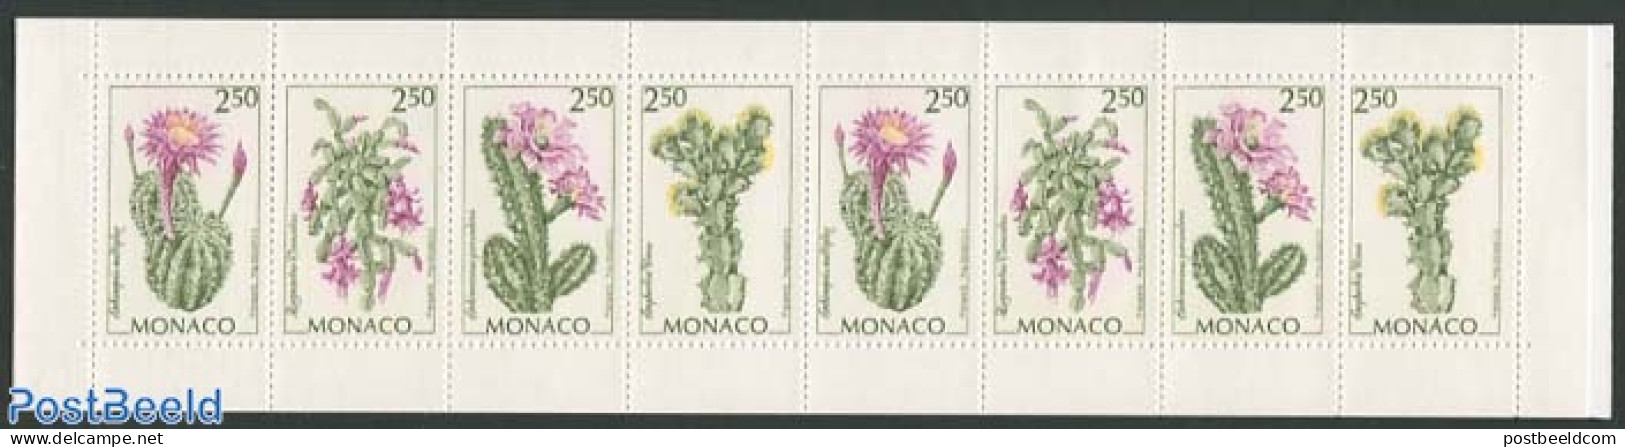 Monaco 1993 Cactus Flowers Booklet, Mint NH, Nature - Cacti - Flowers & Plants - Stamp Booklets - Unused Stamps